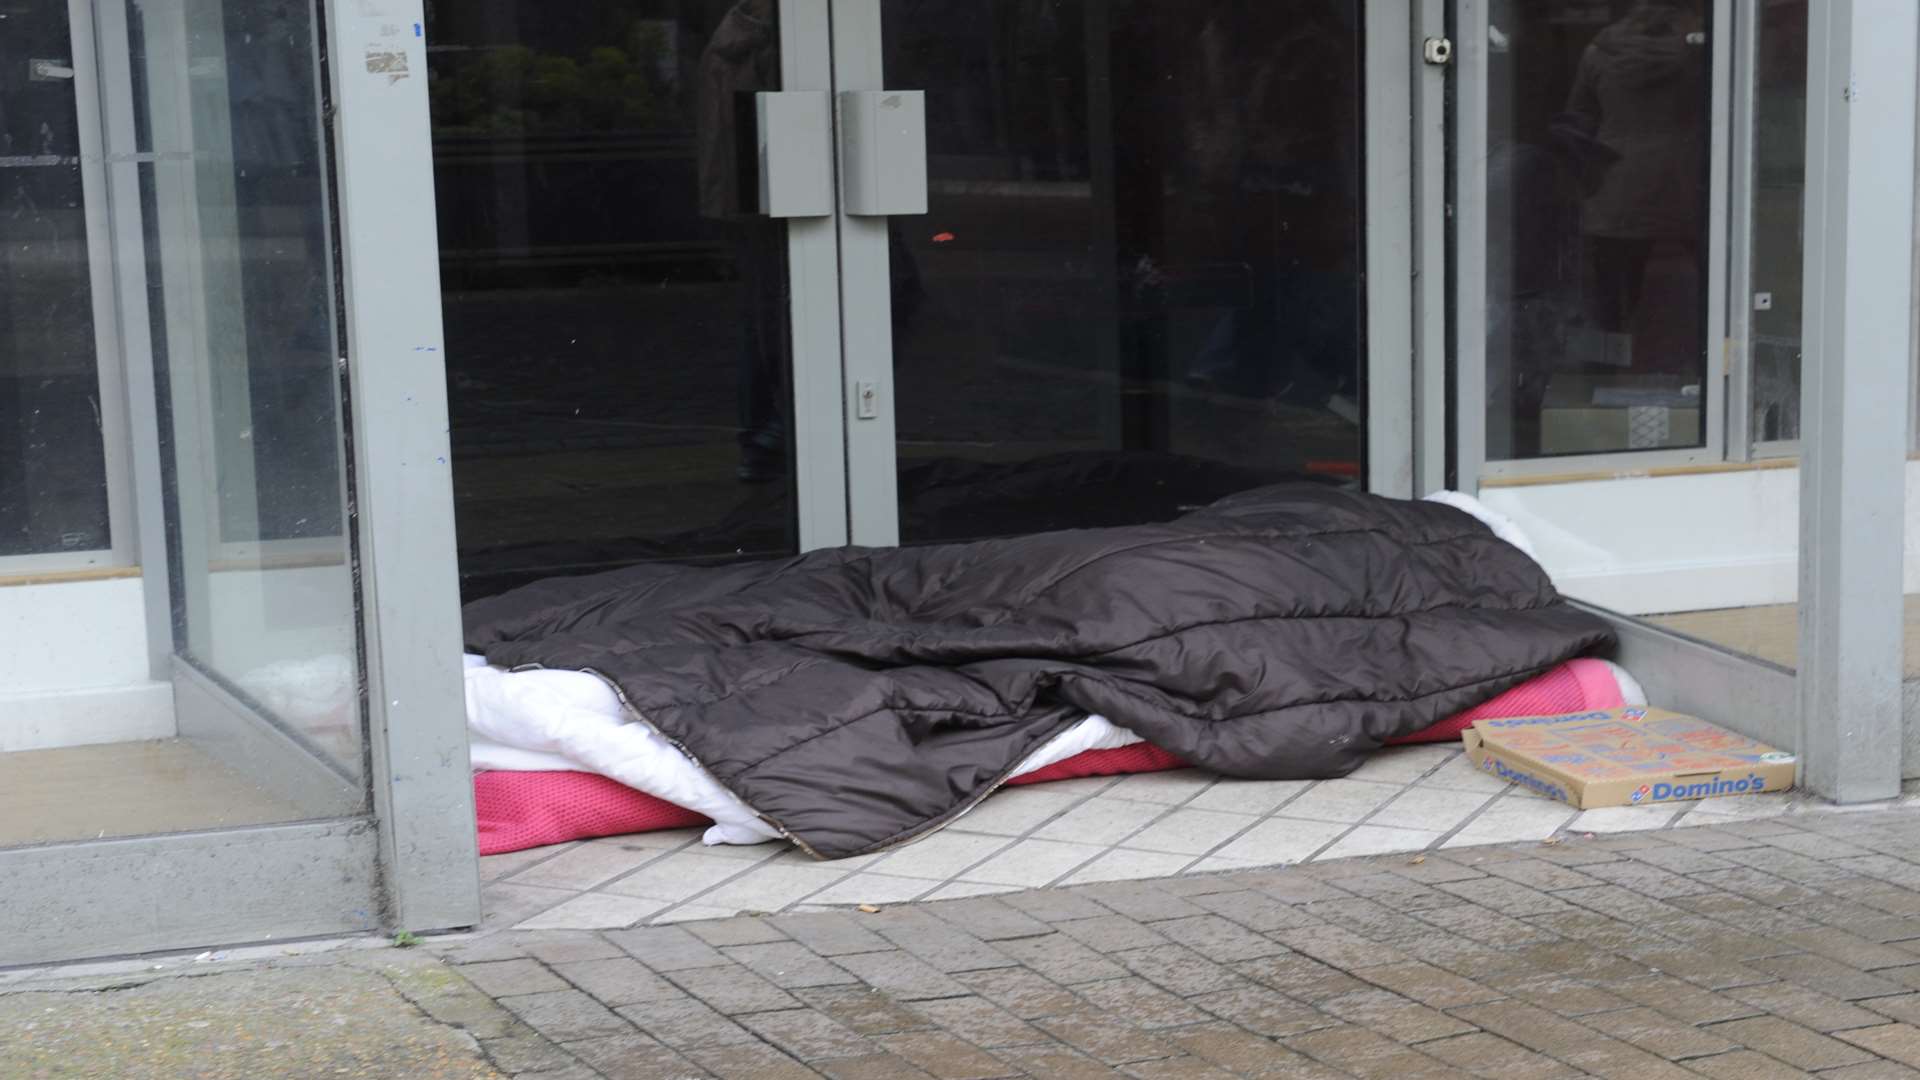 Sight of the homless sleeping rough in Biggin Street, Dover. Archive image